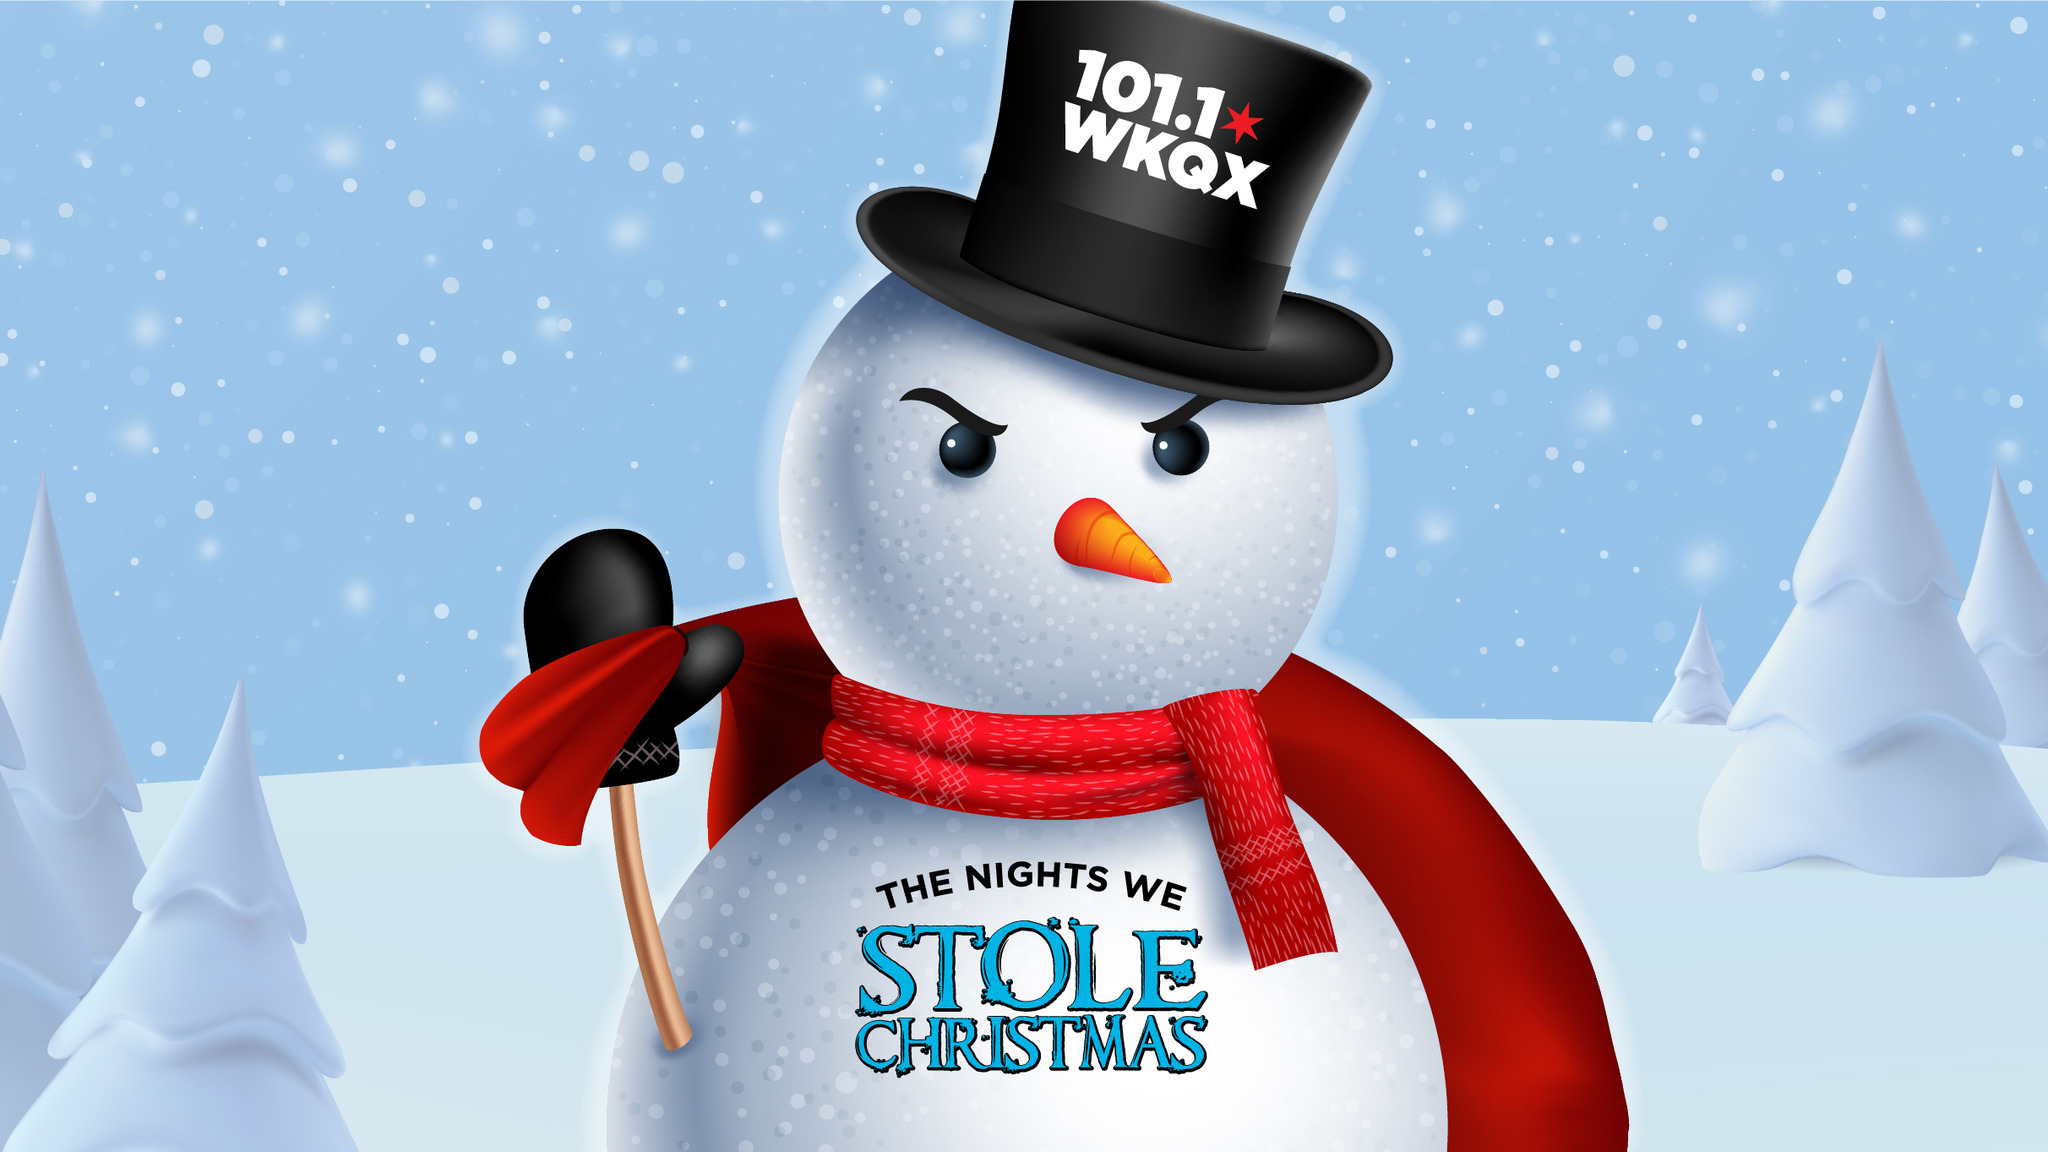 101WKQX The Nights We Stole Christmas Tickets, 20222023 Concert Tour